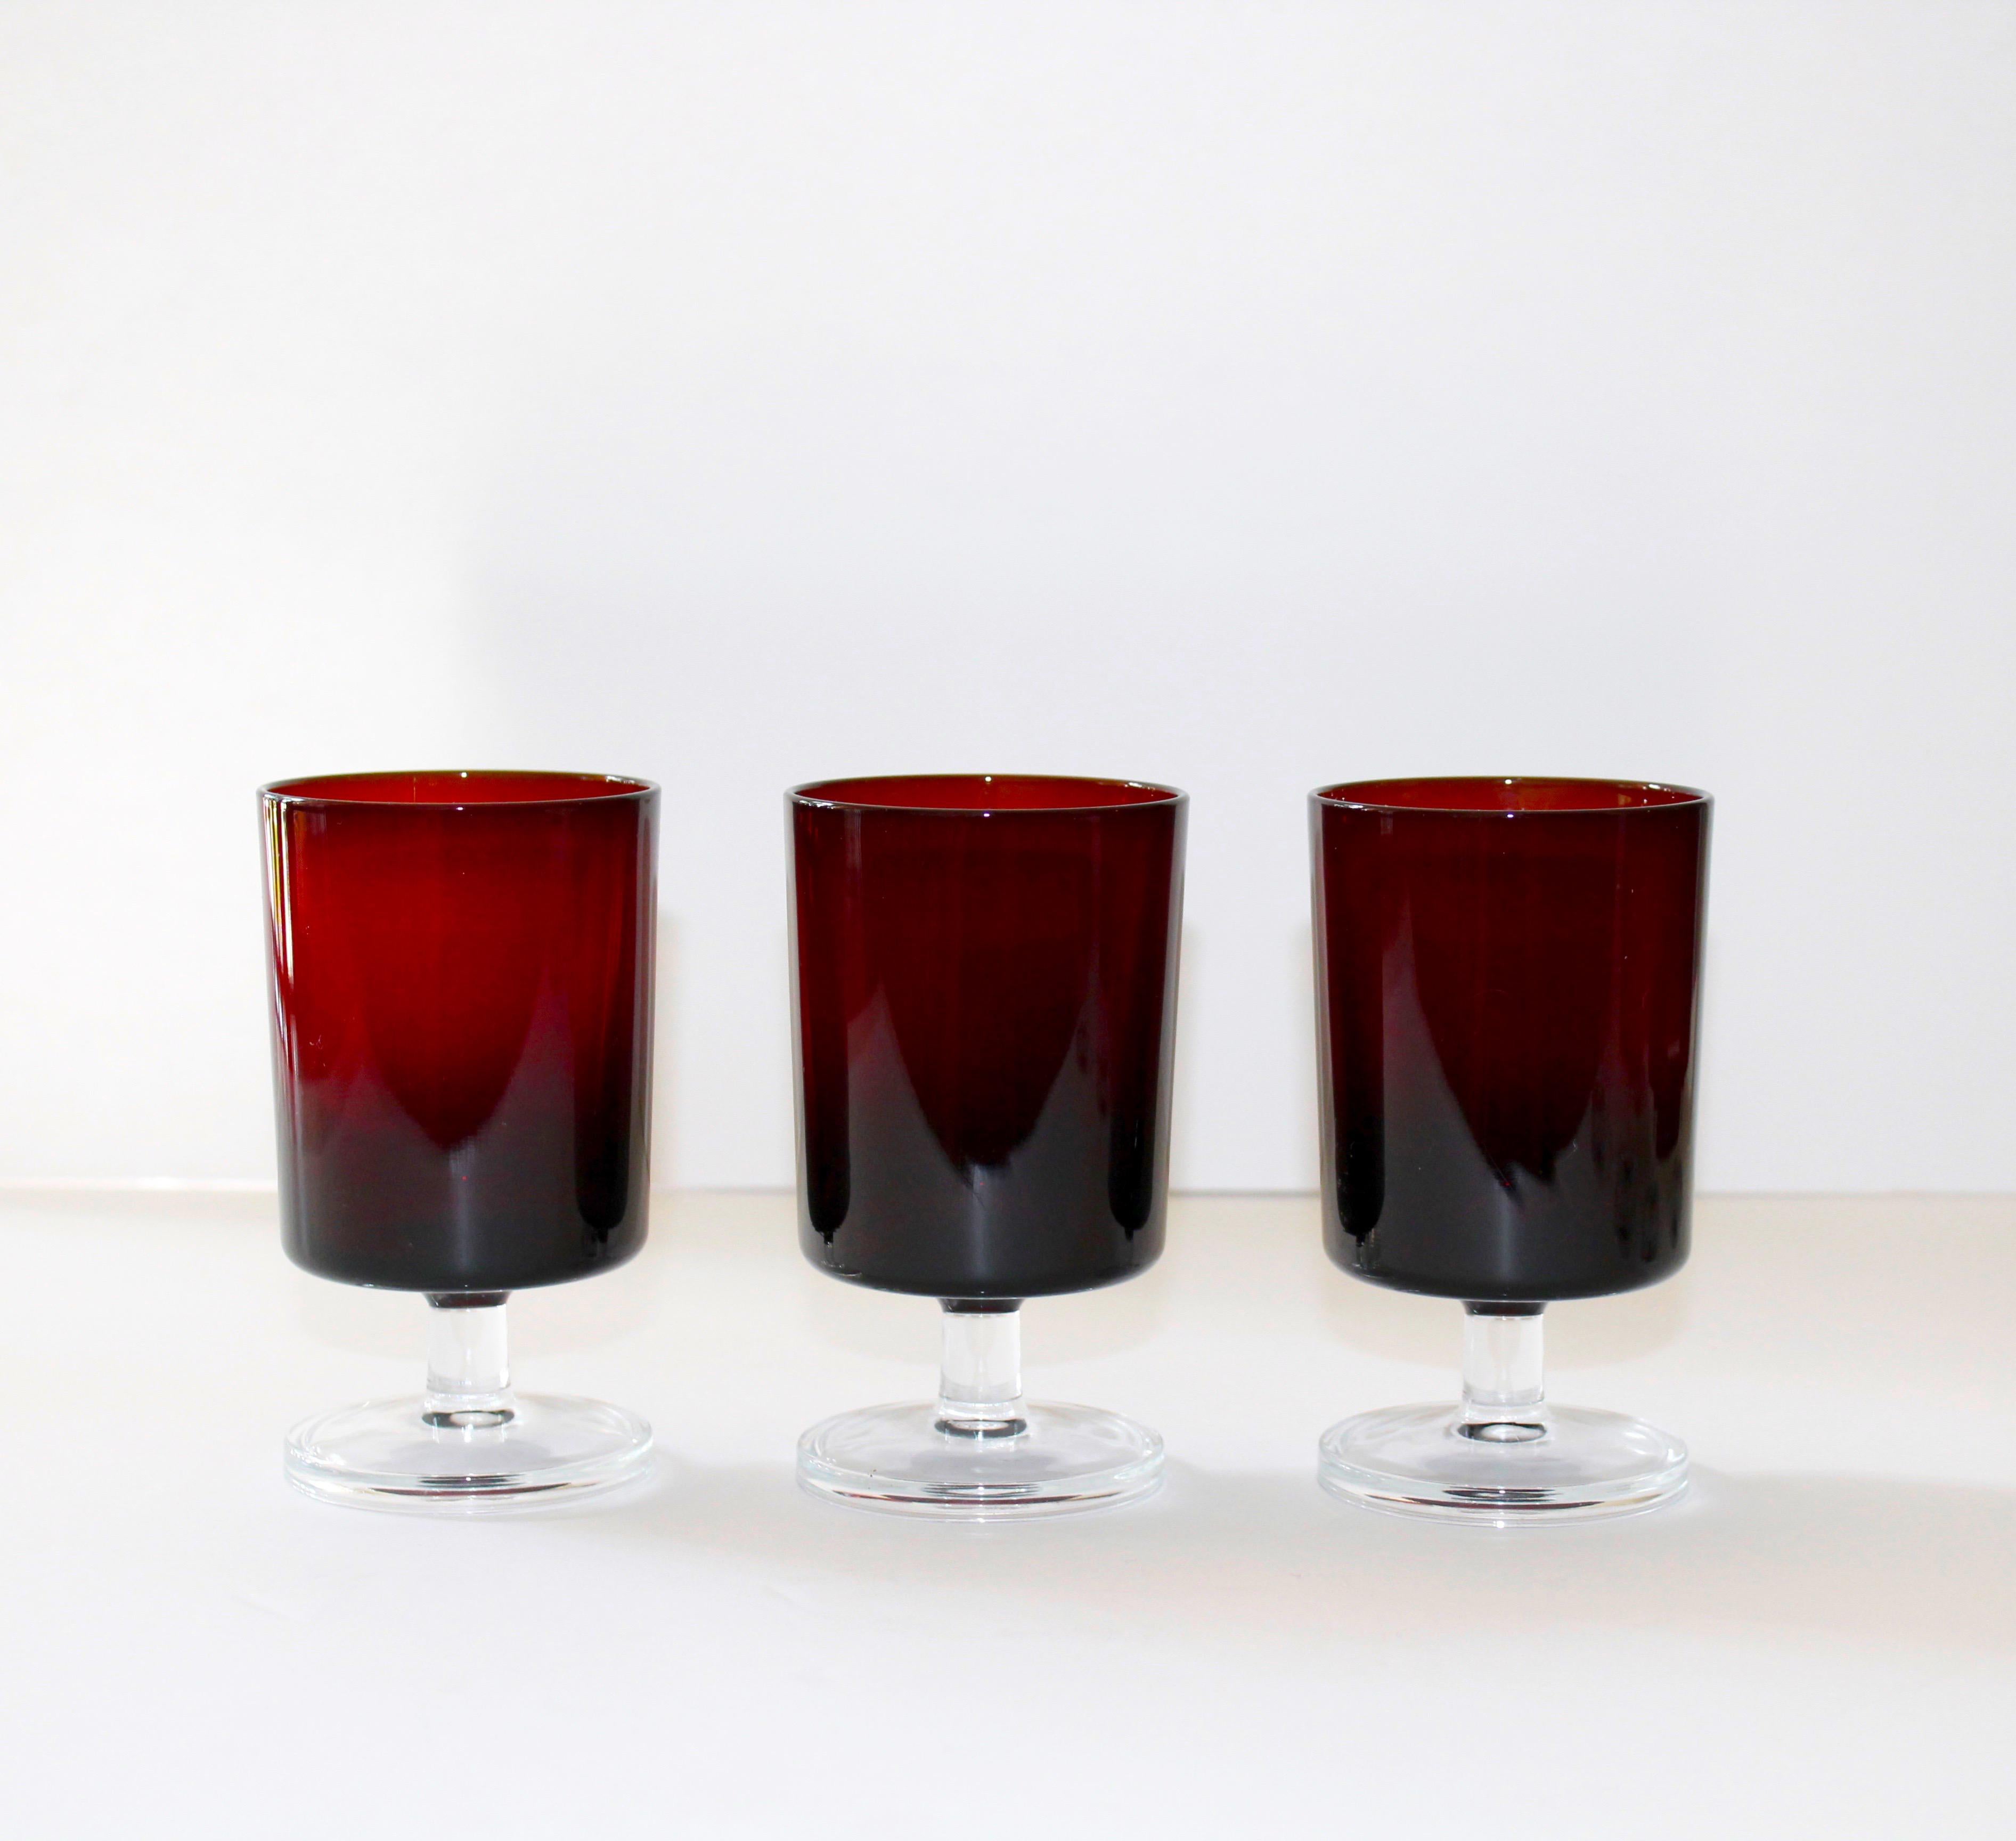 Hand-Crafted French Vintage Stemware Glasses in Ruby Red, Set of Eight, c. 1960s